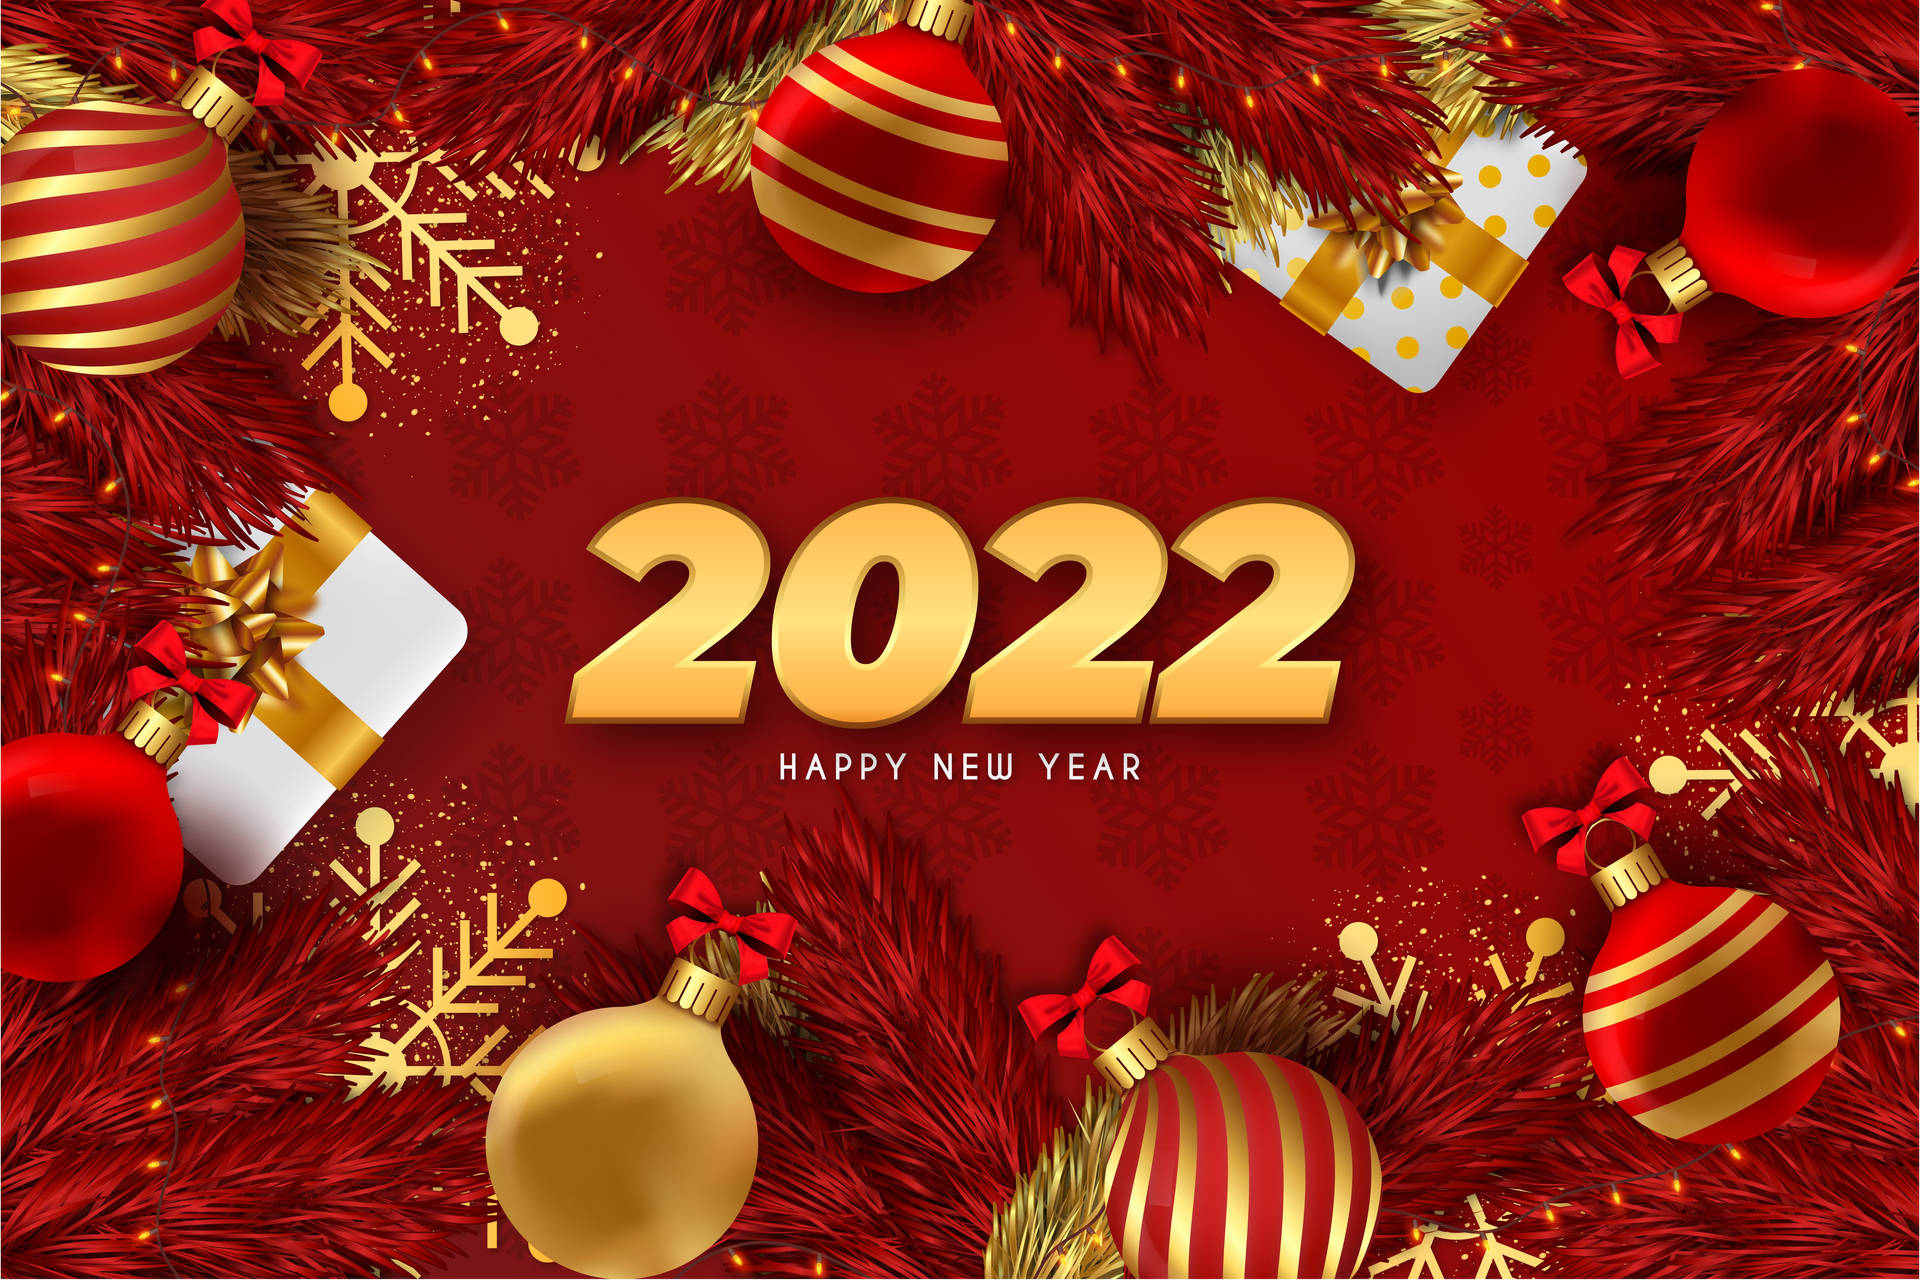 Happy New Year 2022 Red Ornaments Background